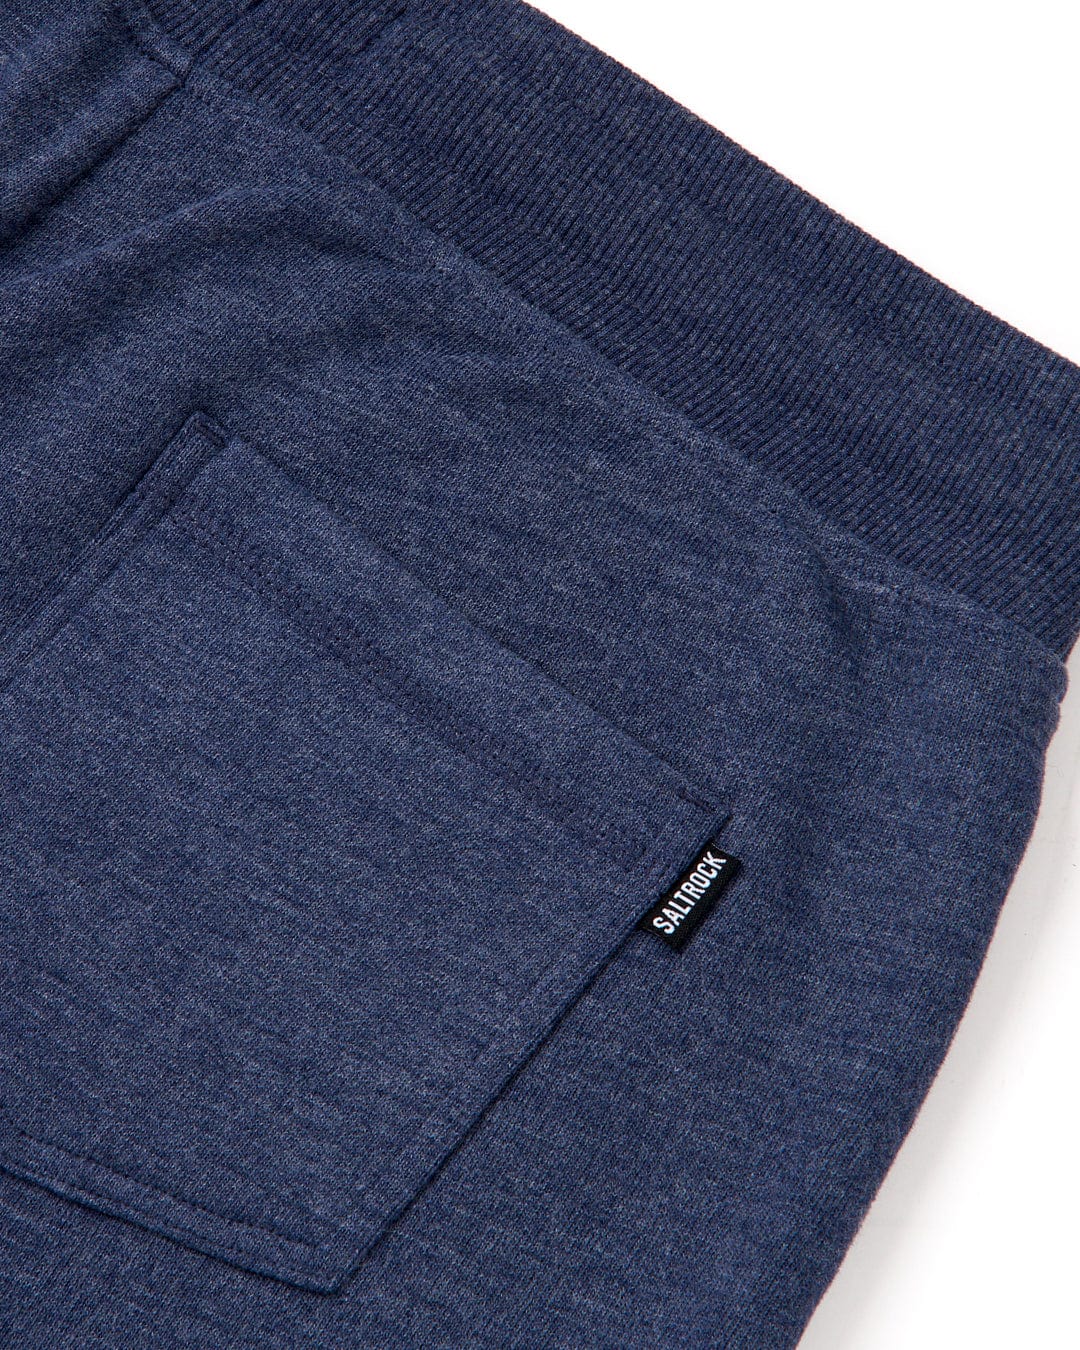 The pocket of a Saltrock Velator Womens Sweat Short in Blue Marl with soft jersey material.